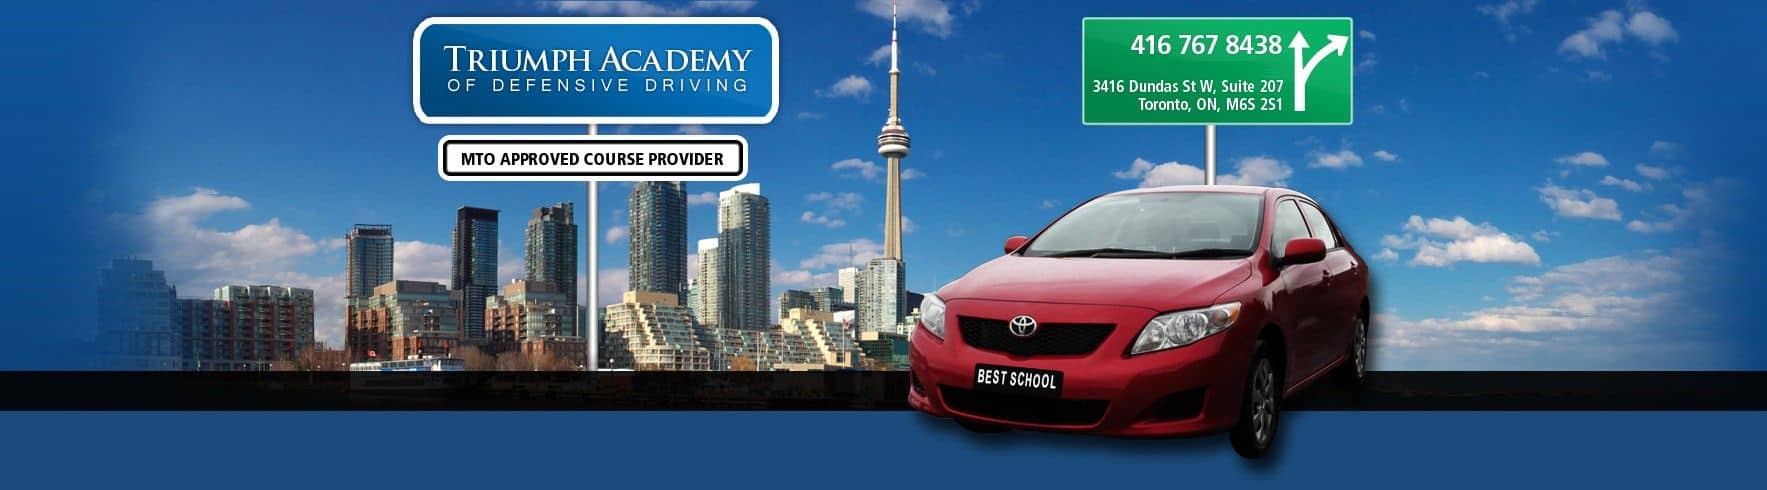 Triumph Academy of Defensive Driving Logo